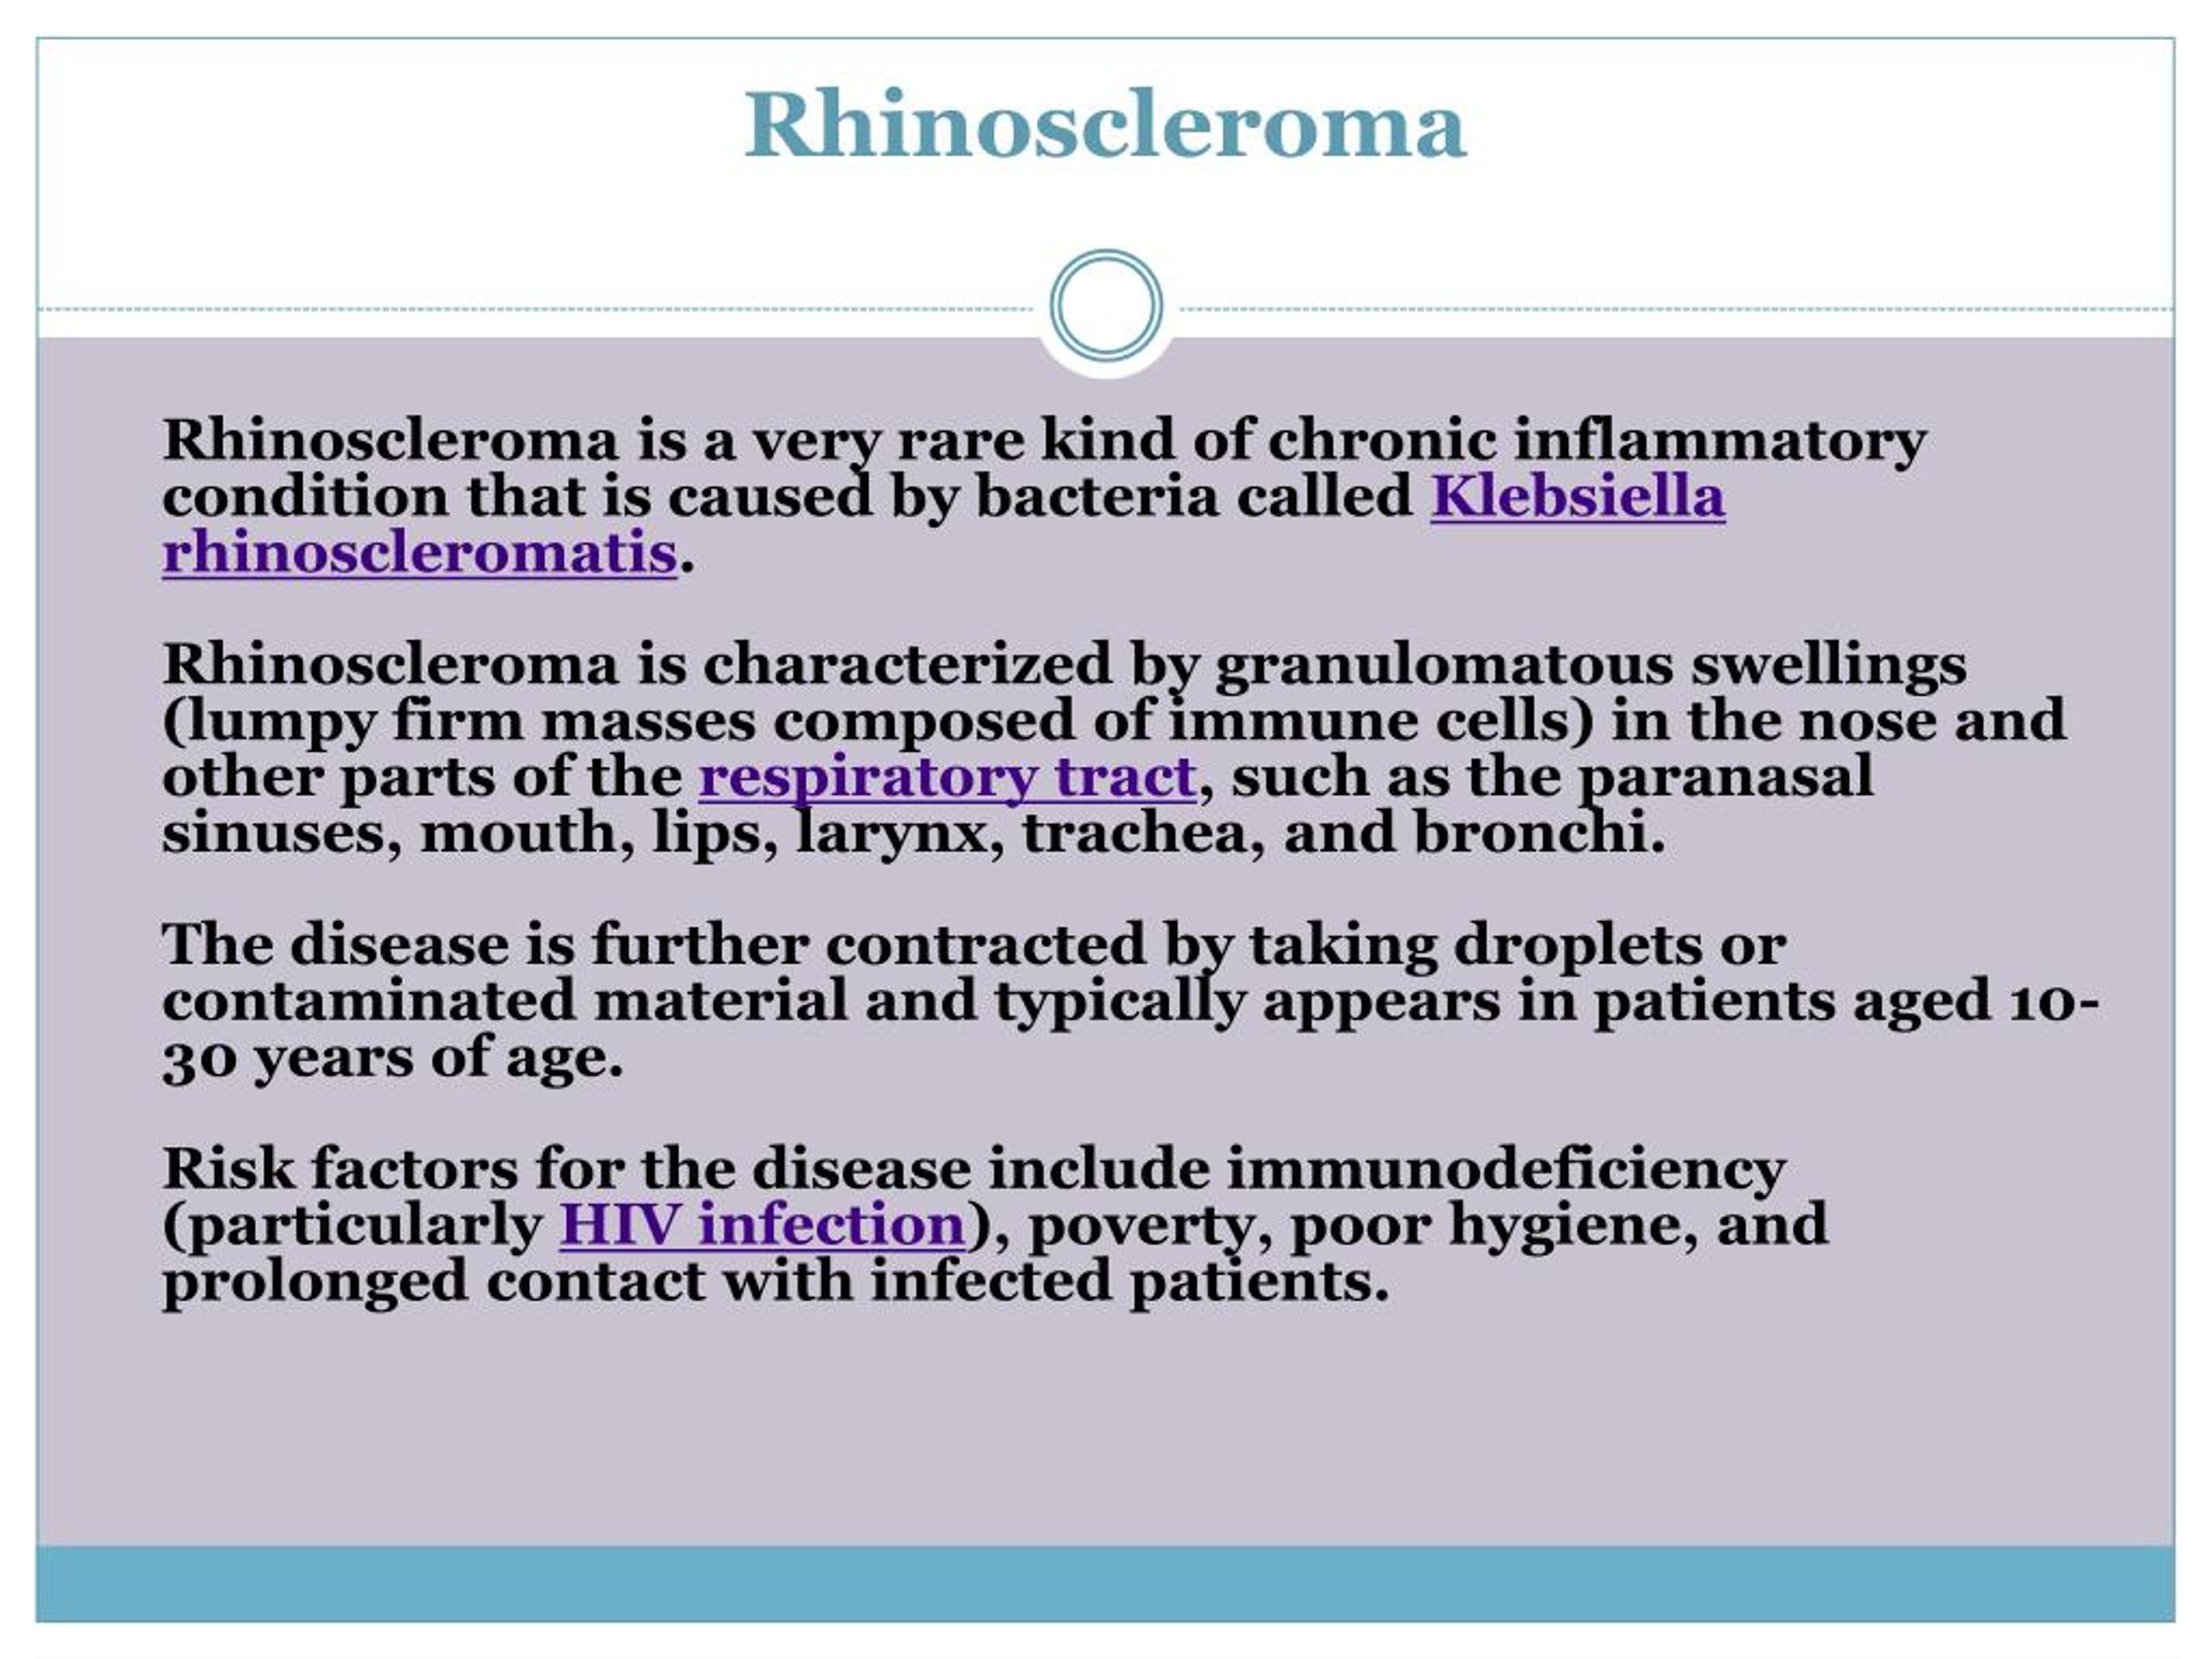 PPT - Rhinoscleroma: Causes, Symptoms, Daignosis, Prevention and ...